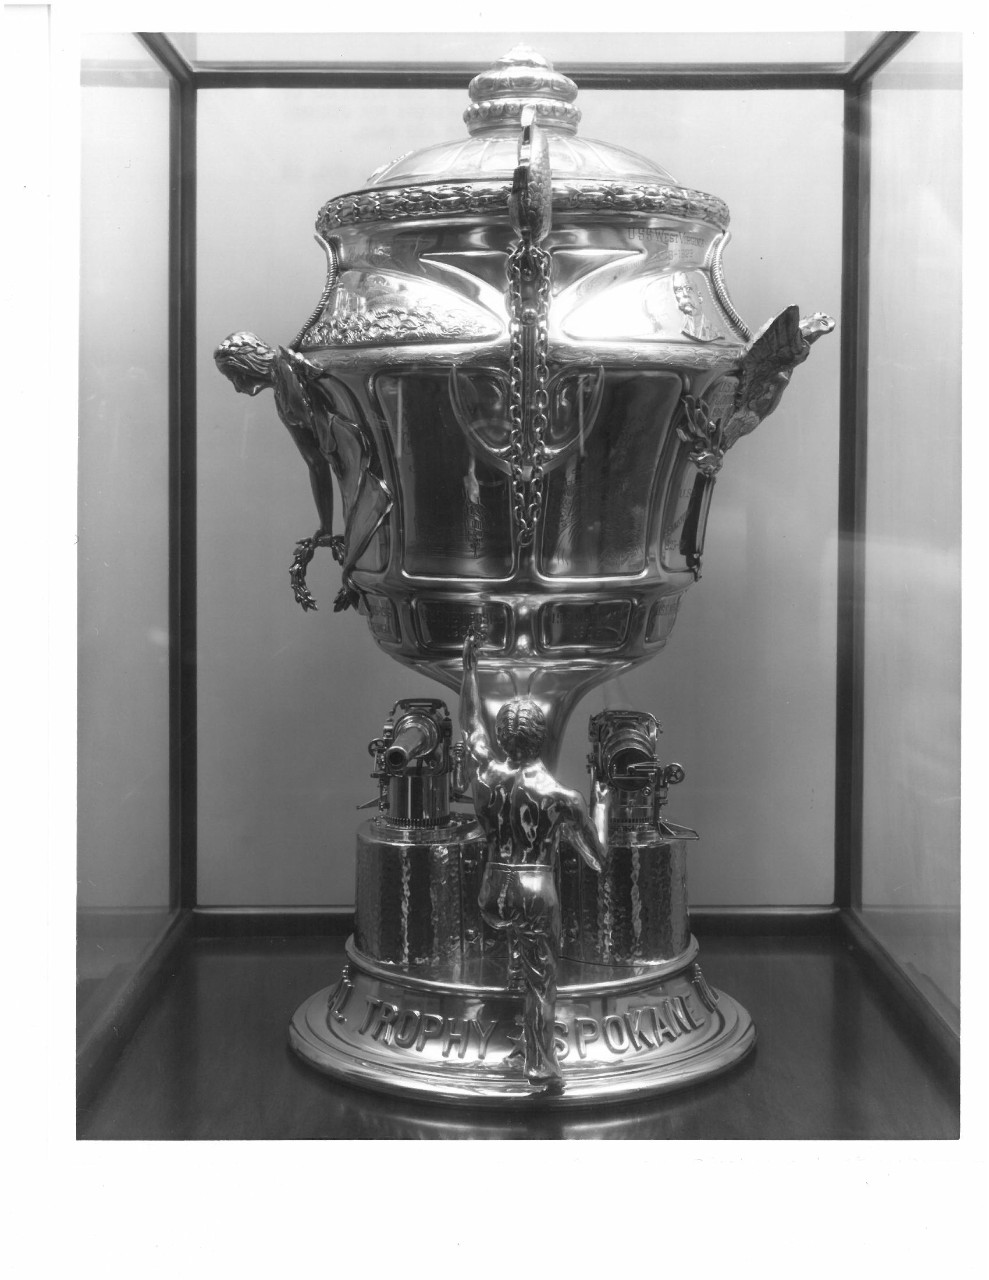 Silver urn style trophy with navy guns and men holding it a target and handles with a lid to cover the cup image of side of cup